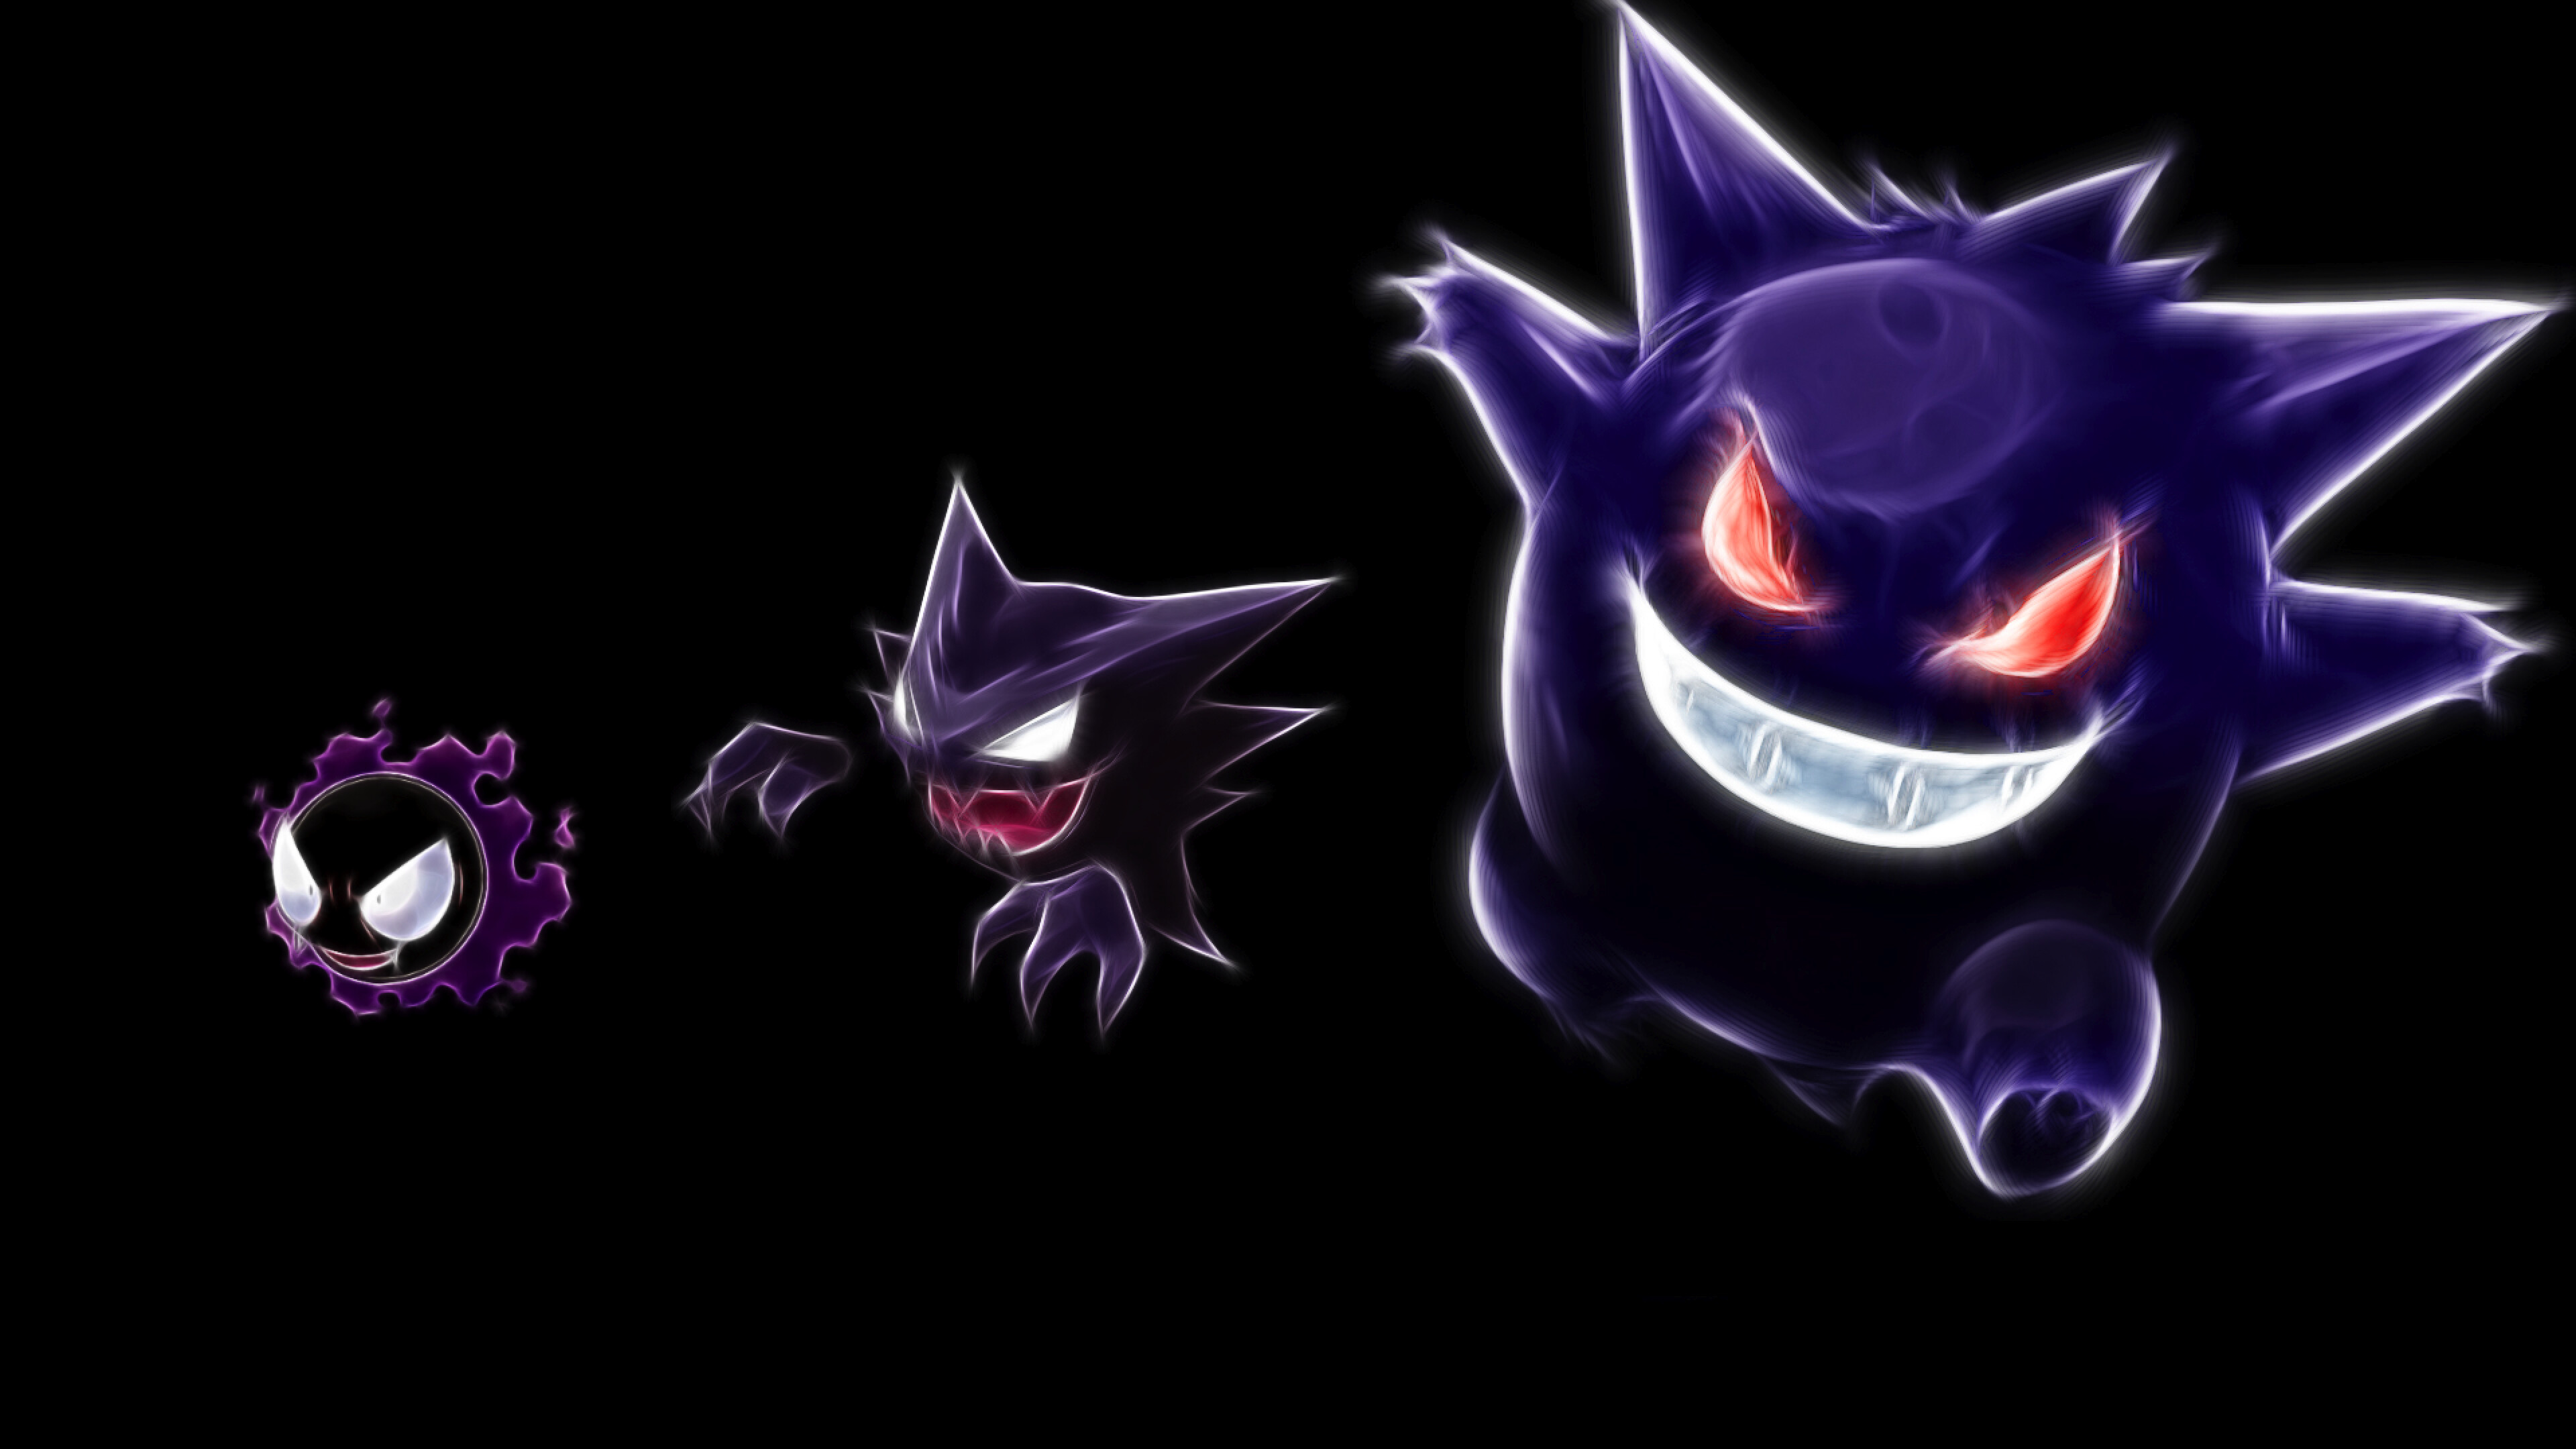 Gastly: Haunter, Gengar, Pokemon that has no real shape as it appears to be made of a gas. 3840x2160 4K Wallpaper.